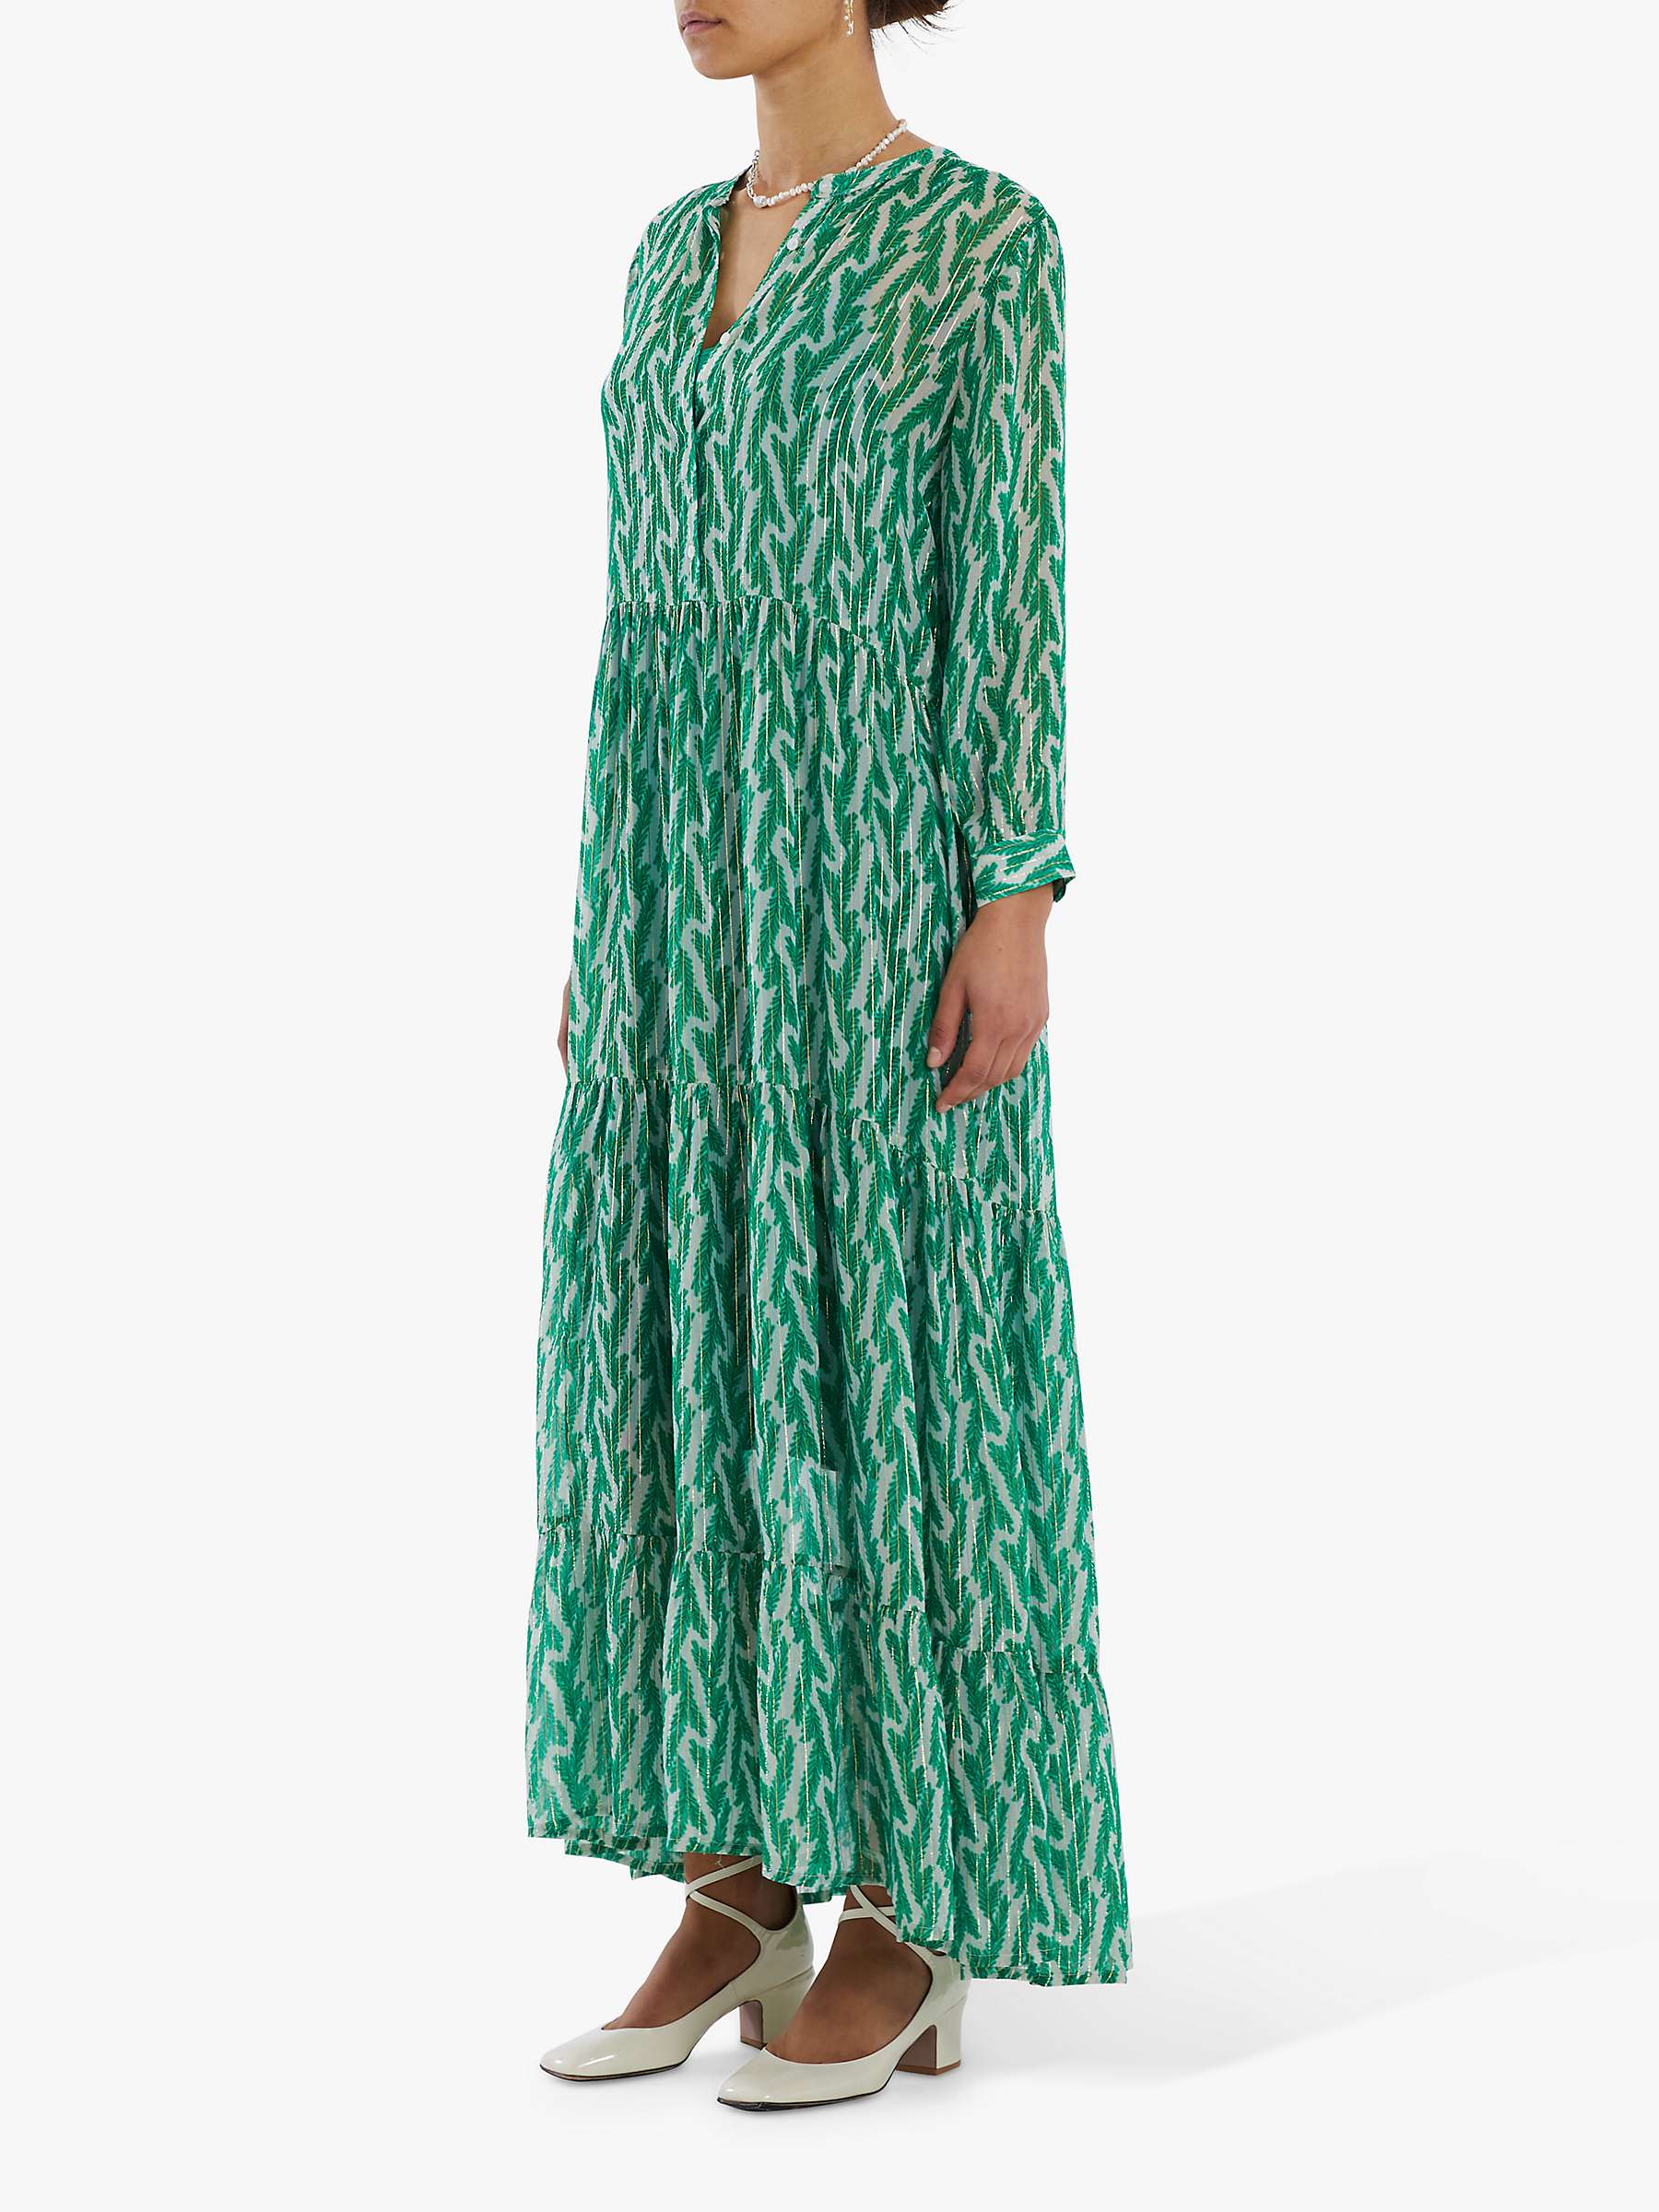 Lollys Laundry Nee Abstract Print Maxi Dress, Green/Multi at John Lewis ...